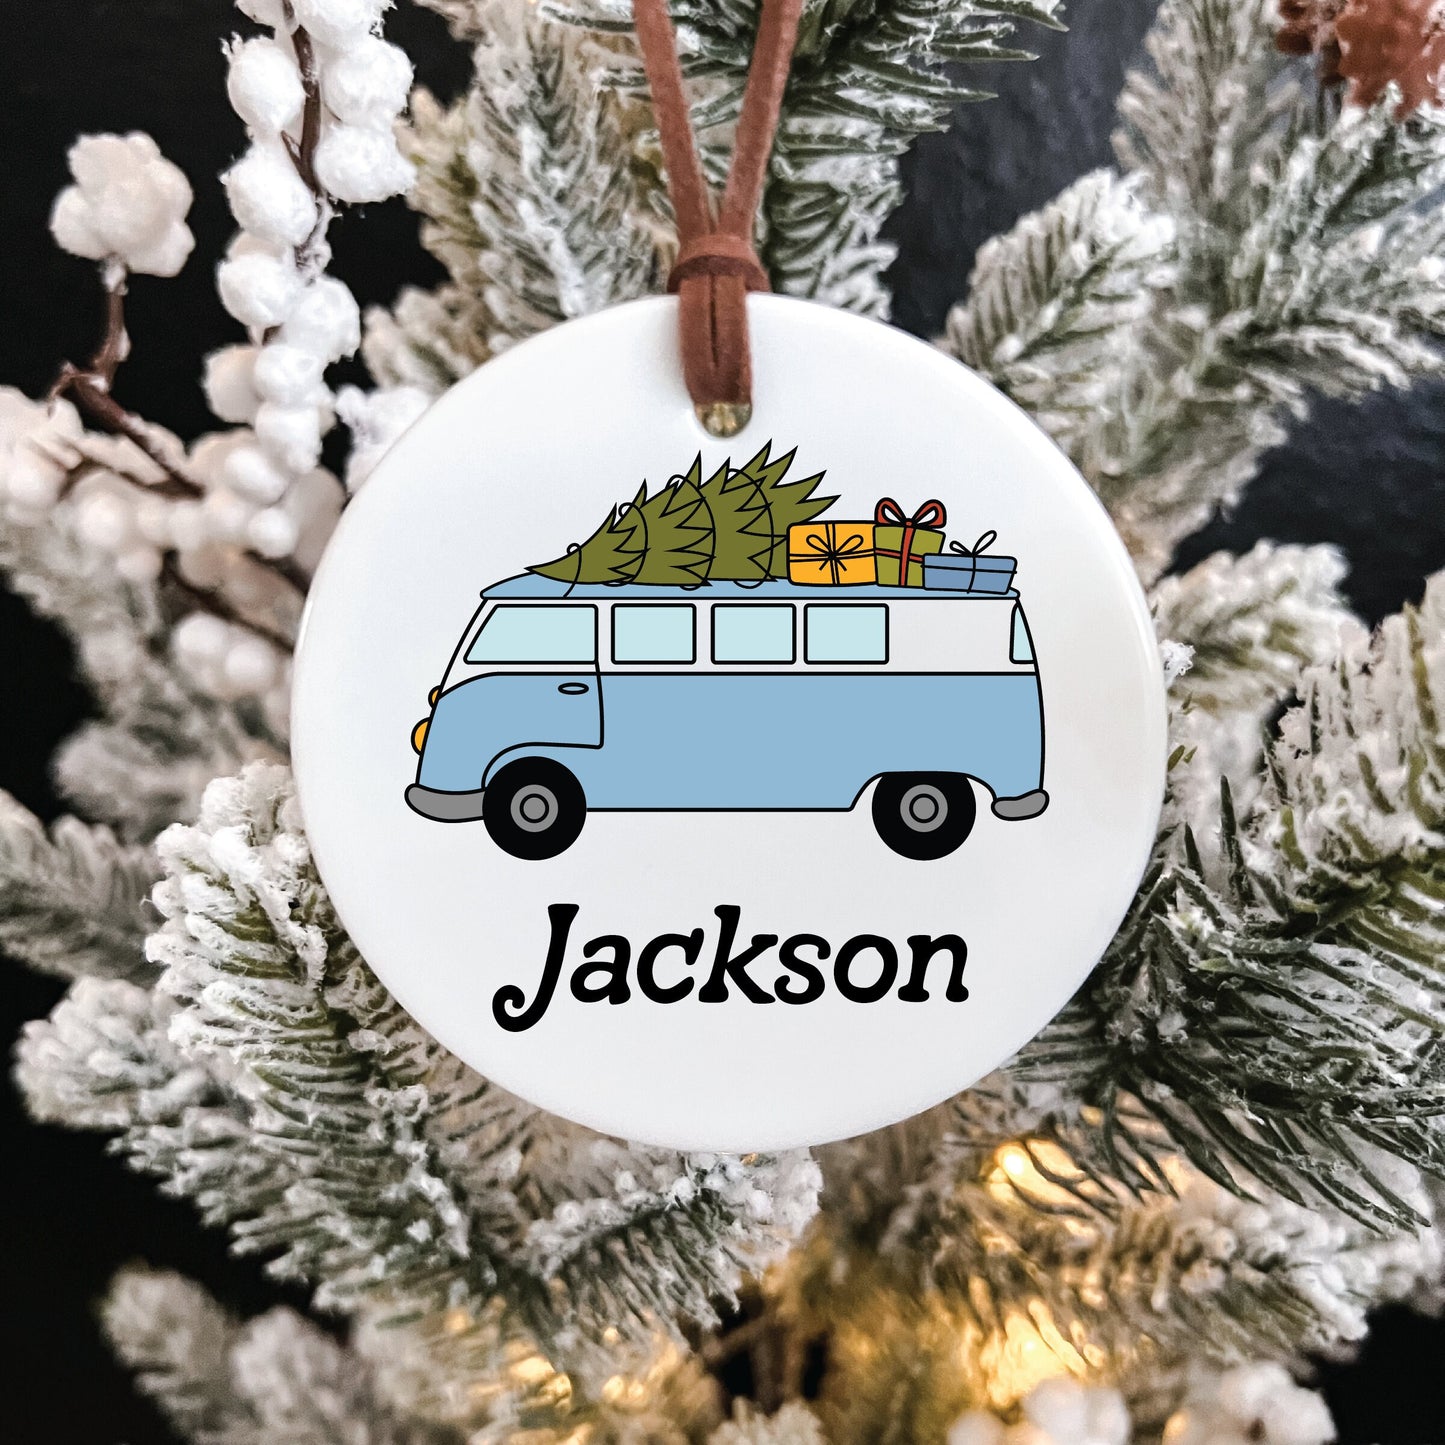 Christmas Ornament / Ceramic Porcelain Ornament / Baby Birth Stats / Personalized Newborn Ornament / Gift for New Parents / Festive VW Van